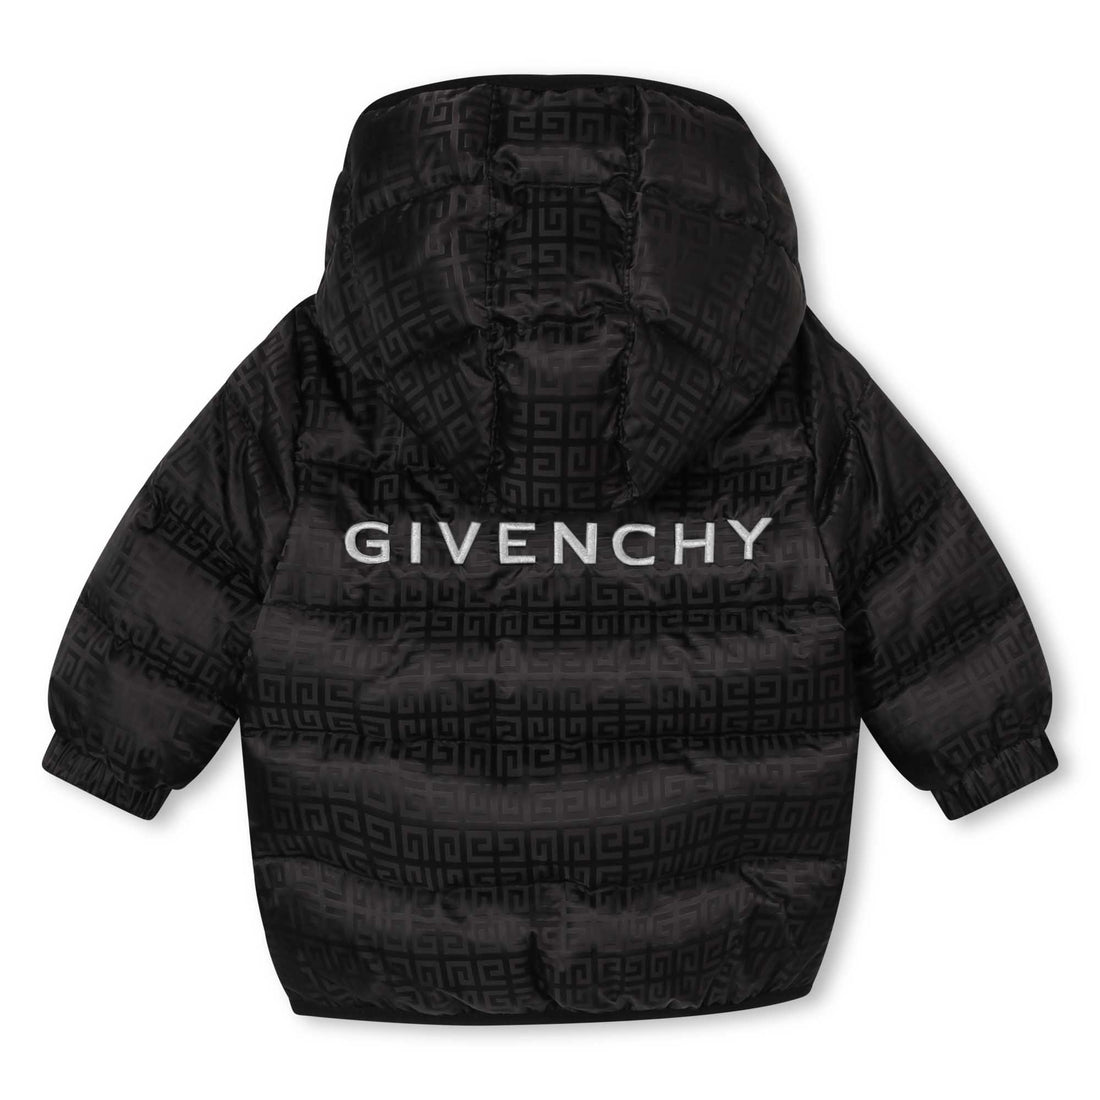 Givenchy Puffer Jacket Style: H06068